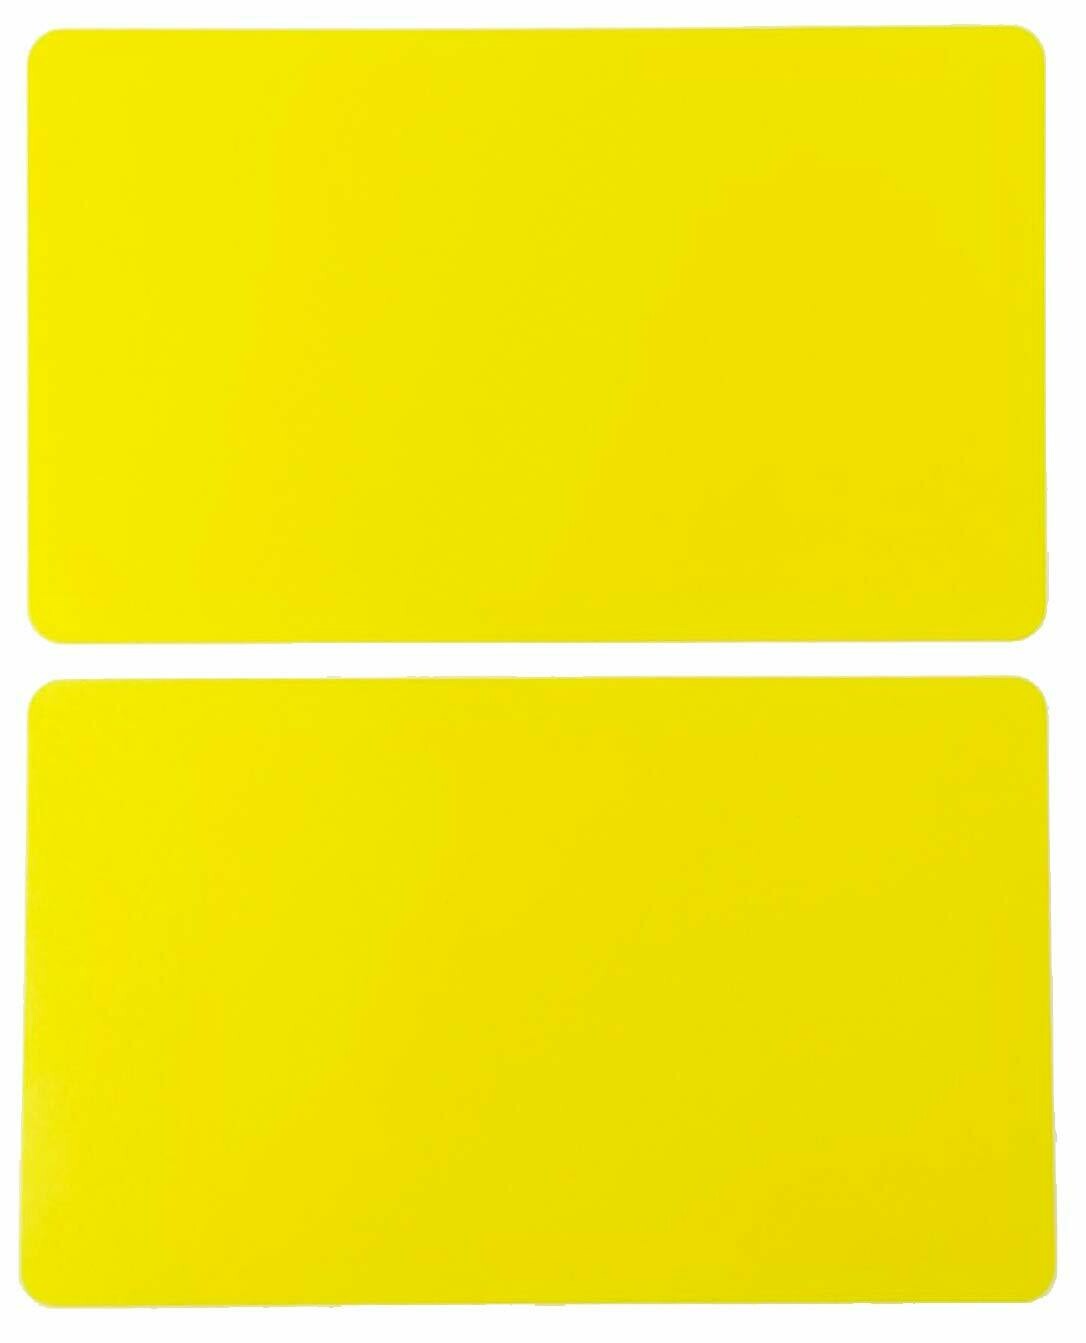 Tag-A-Room Color Coded Labels 2" x 3" Stickers 50 Count - Yellow